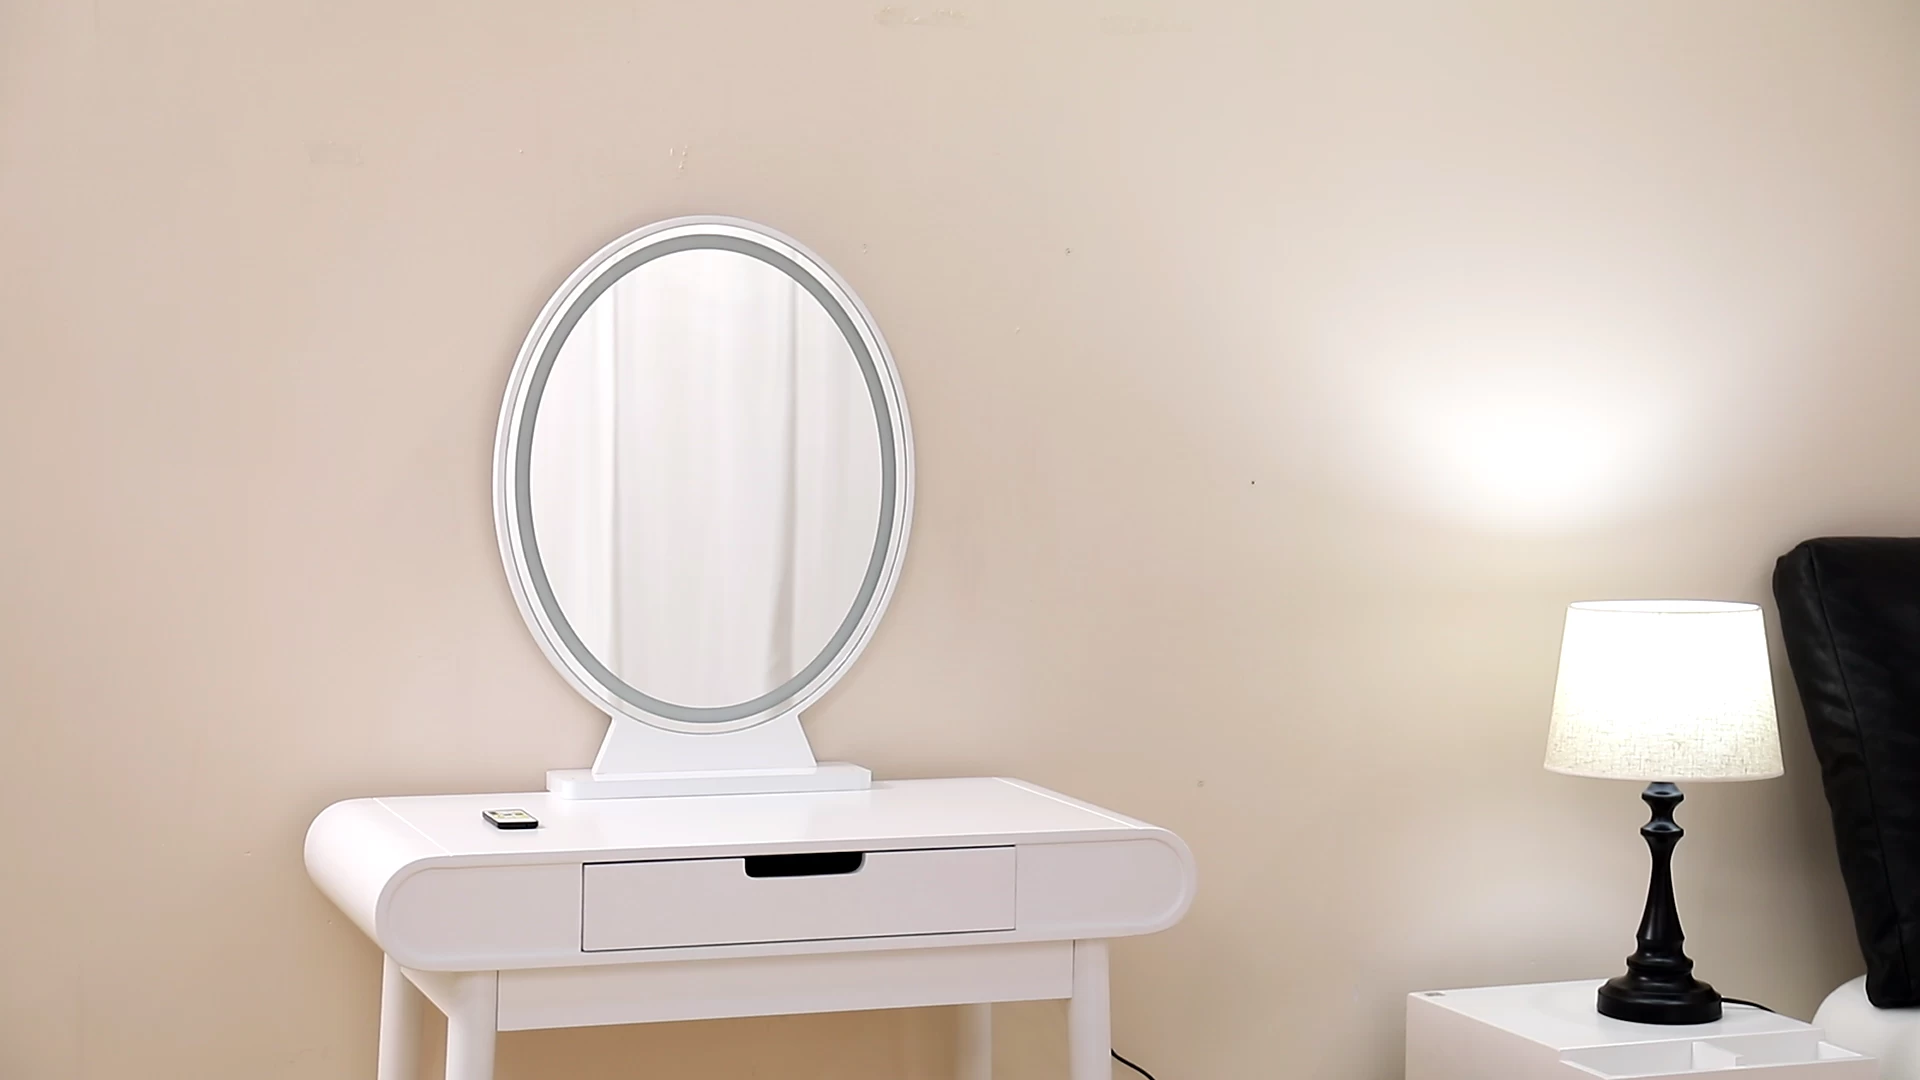 Wooden Vanity Mirror Can Adjust Light Color and Brightness With Remote Control